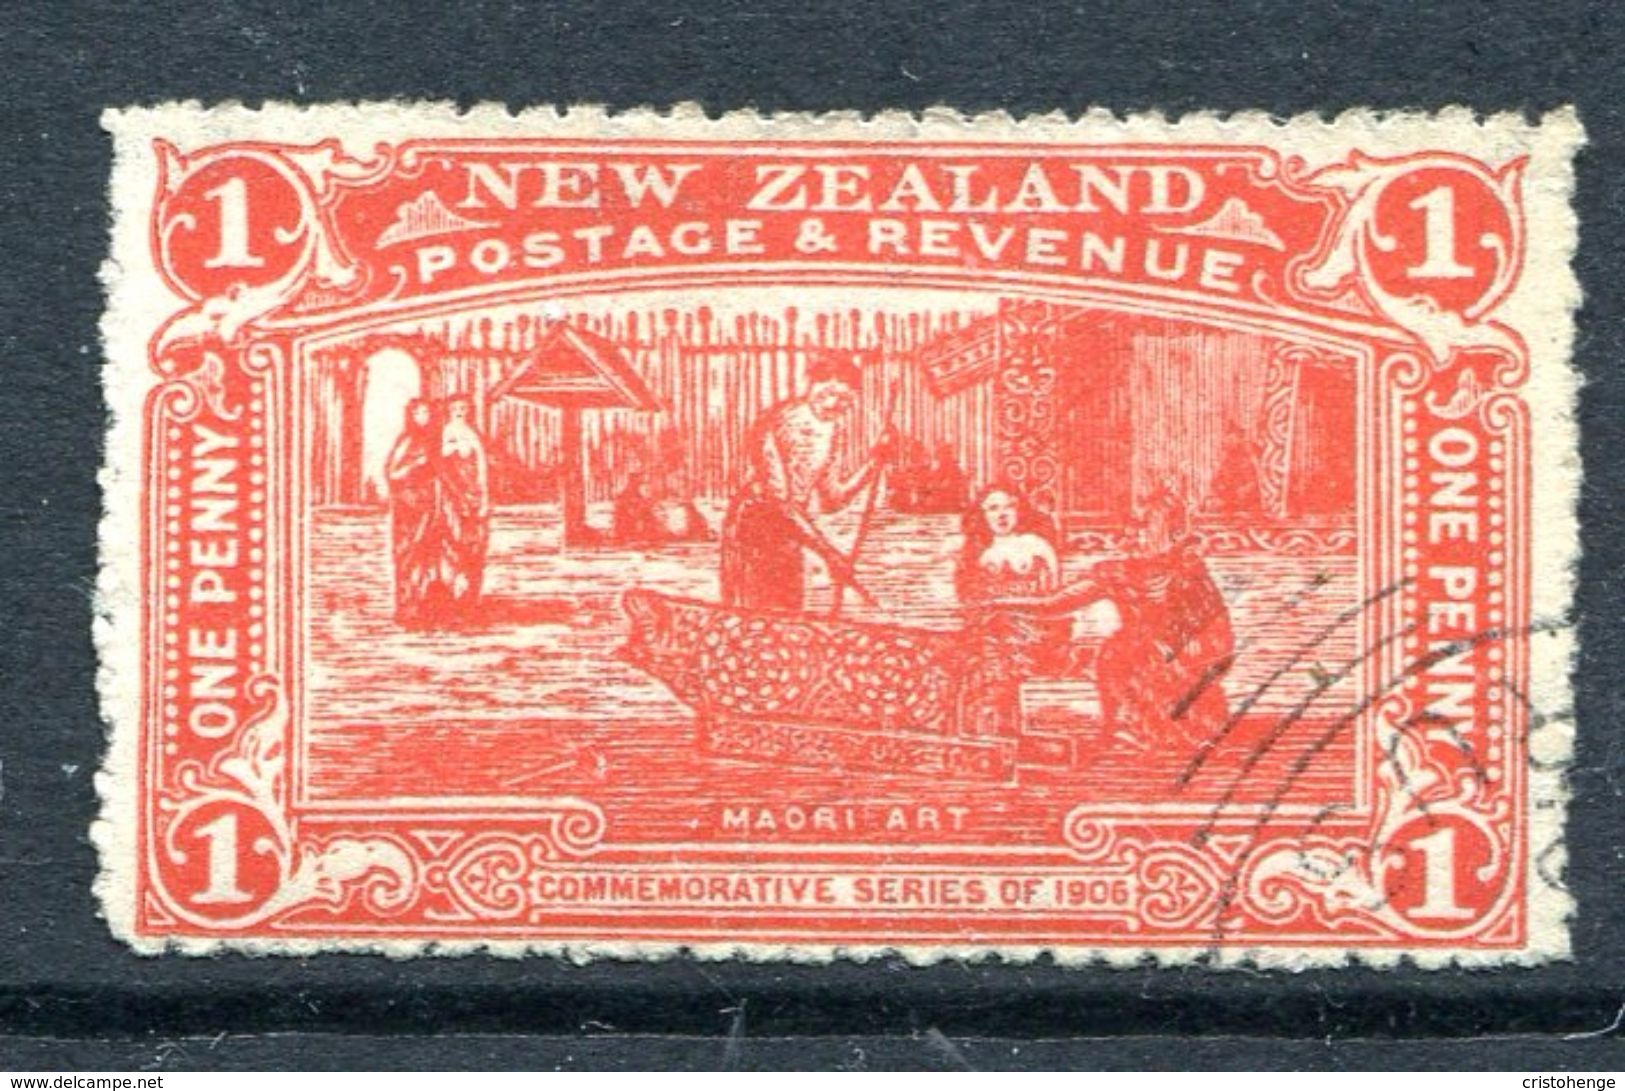 New Zealand 1906 Christchurch Exhibition - 1d Maori Art Used (SG 371) - Used Stamps